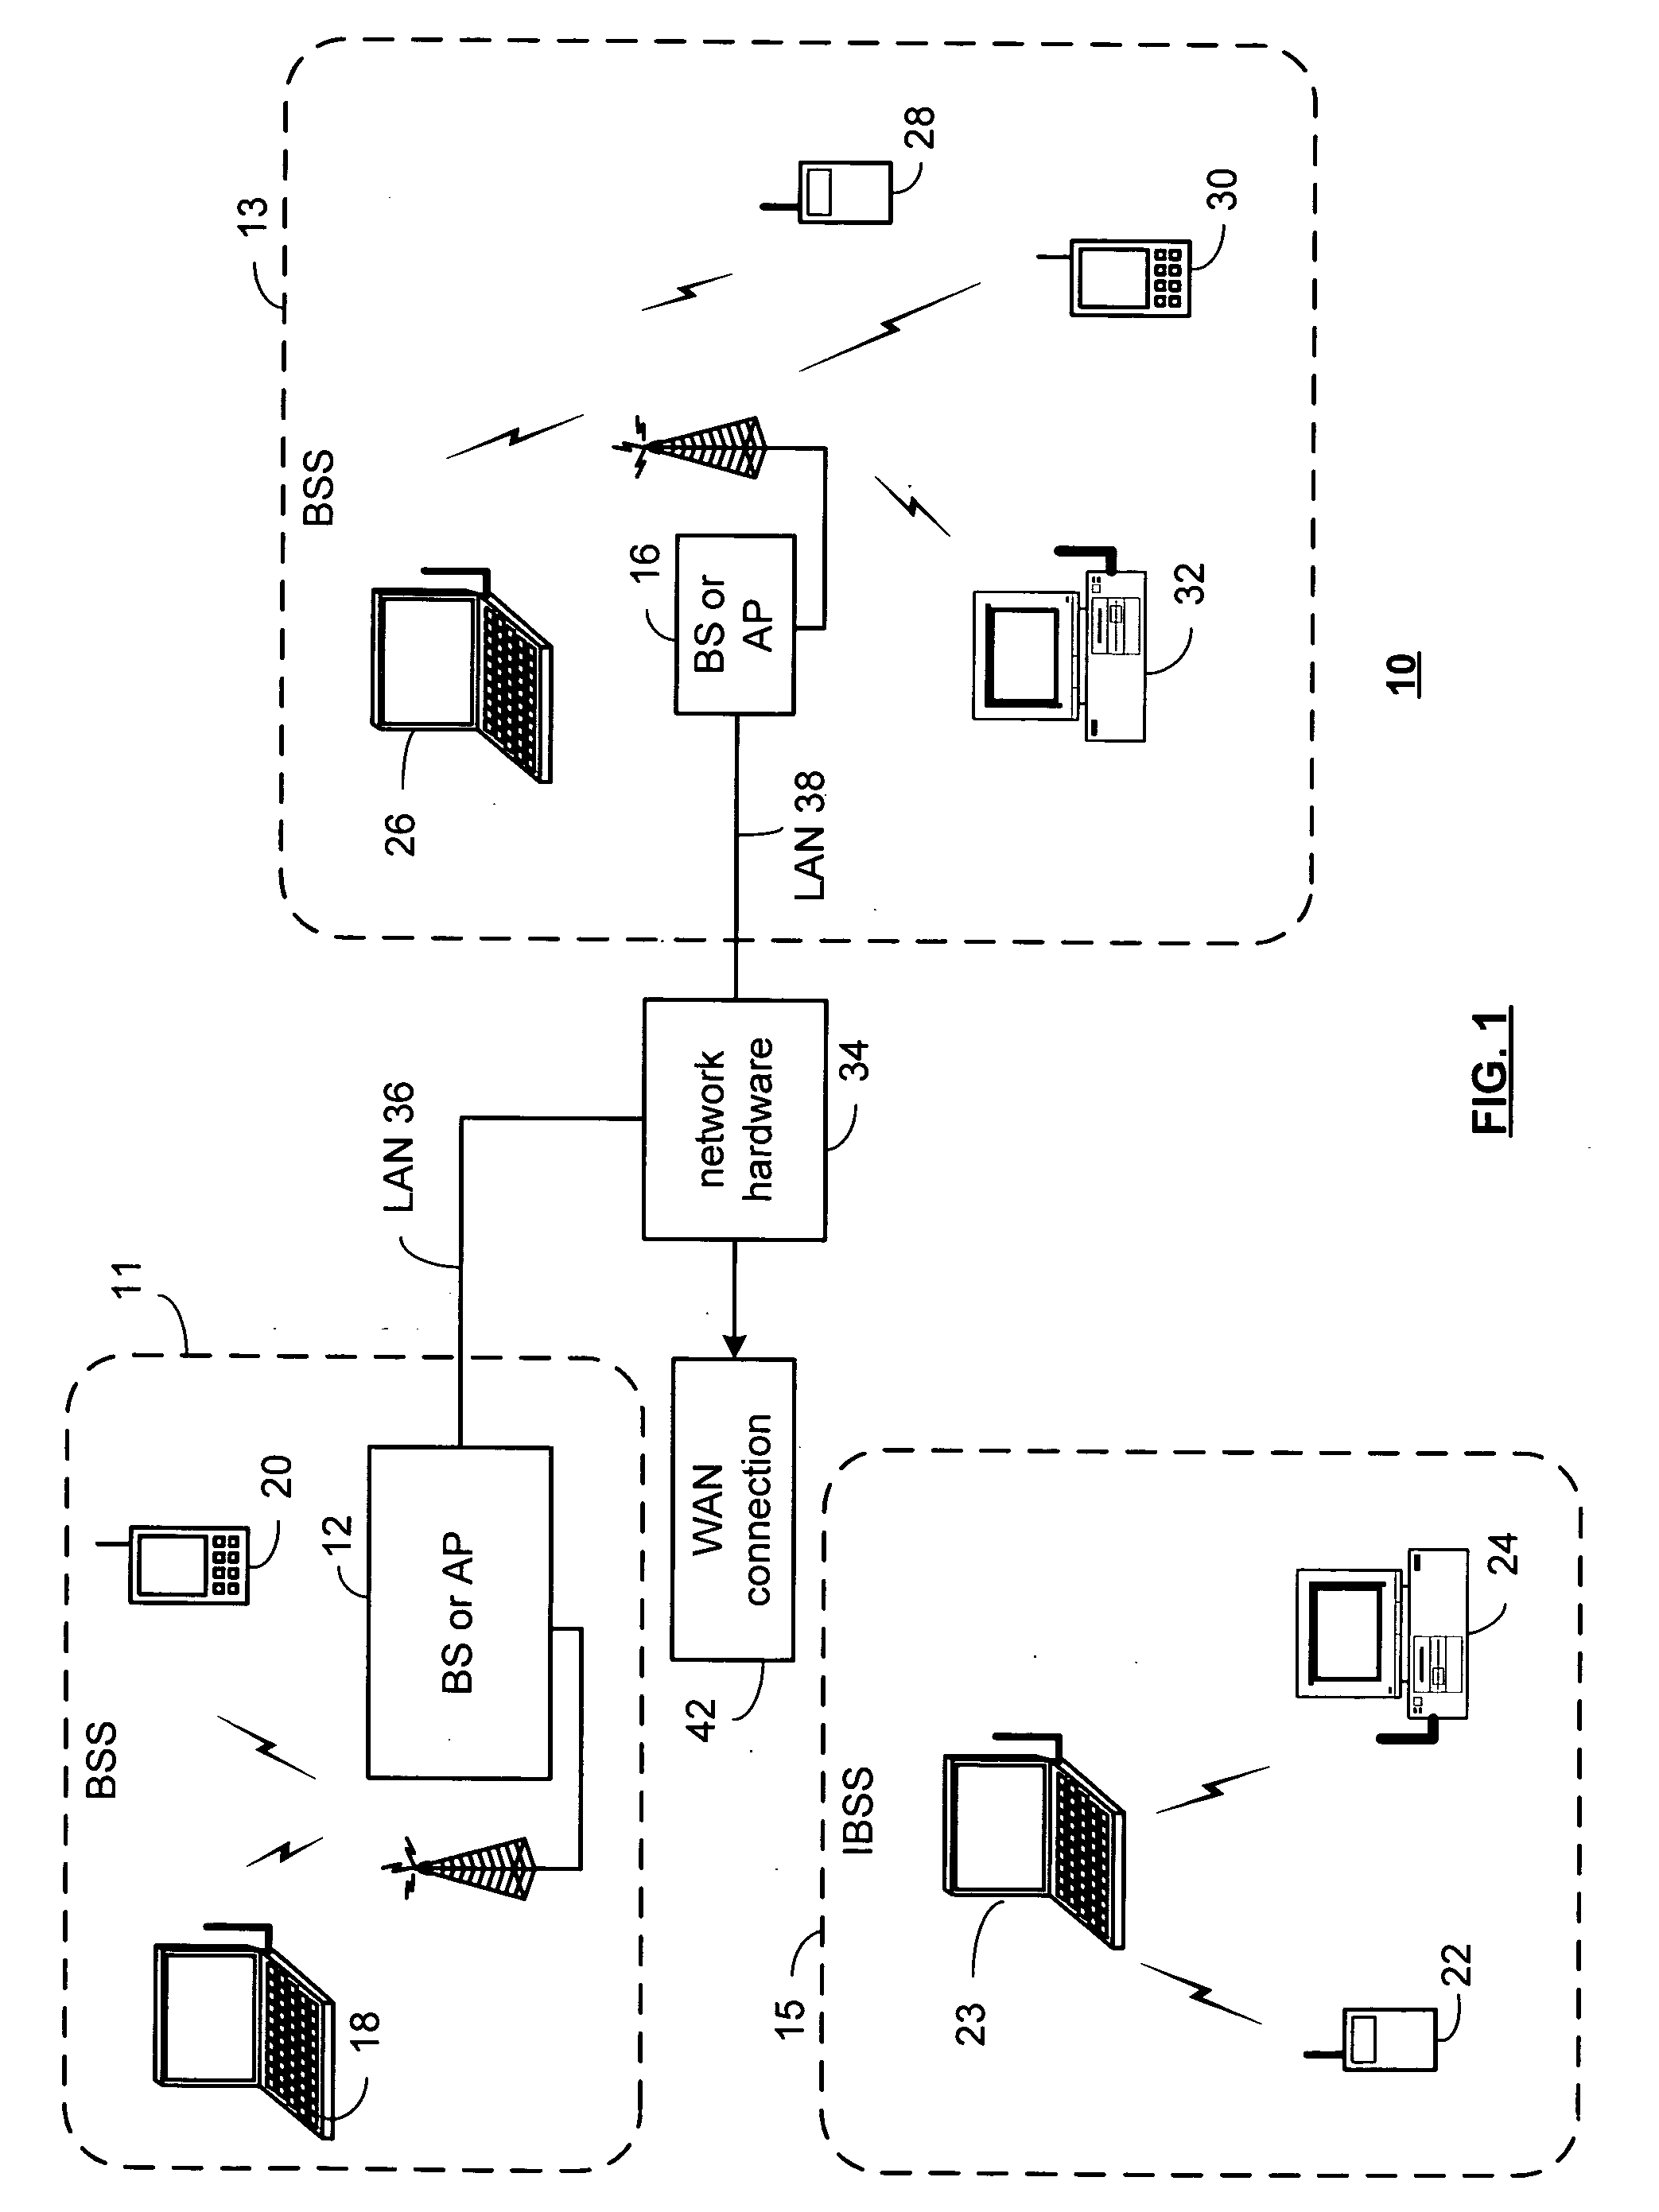 Transmitting high rate data within a MIMO WLAN